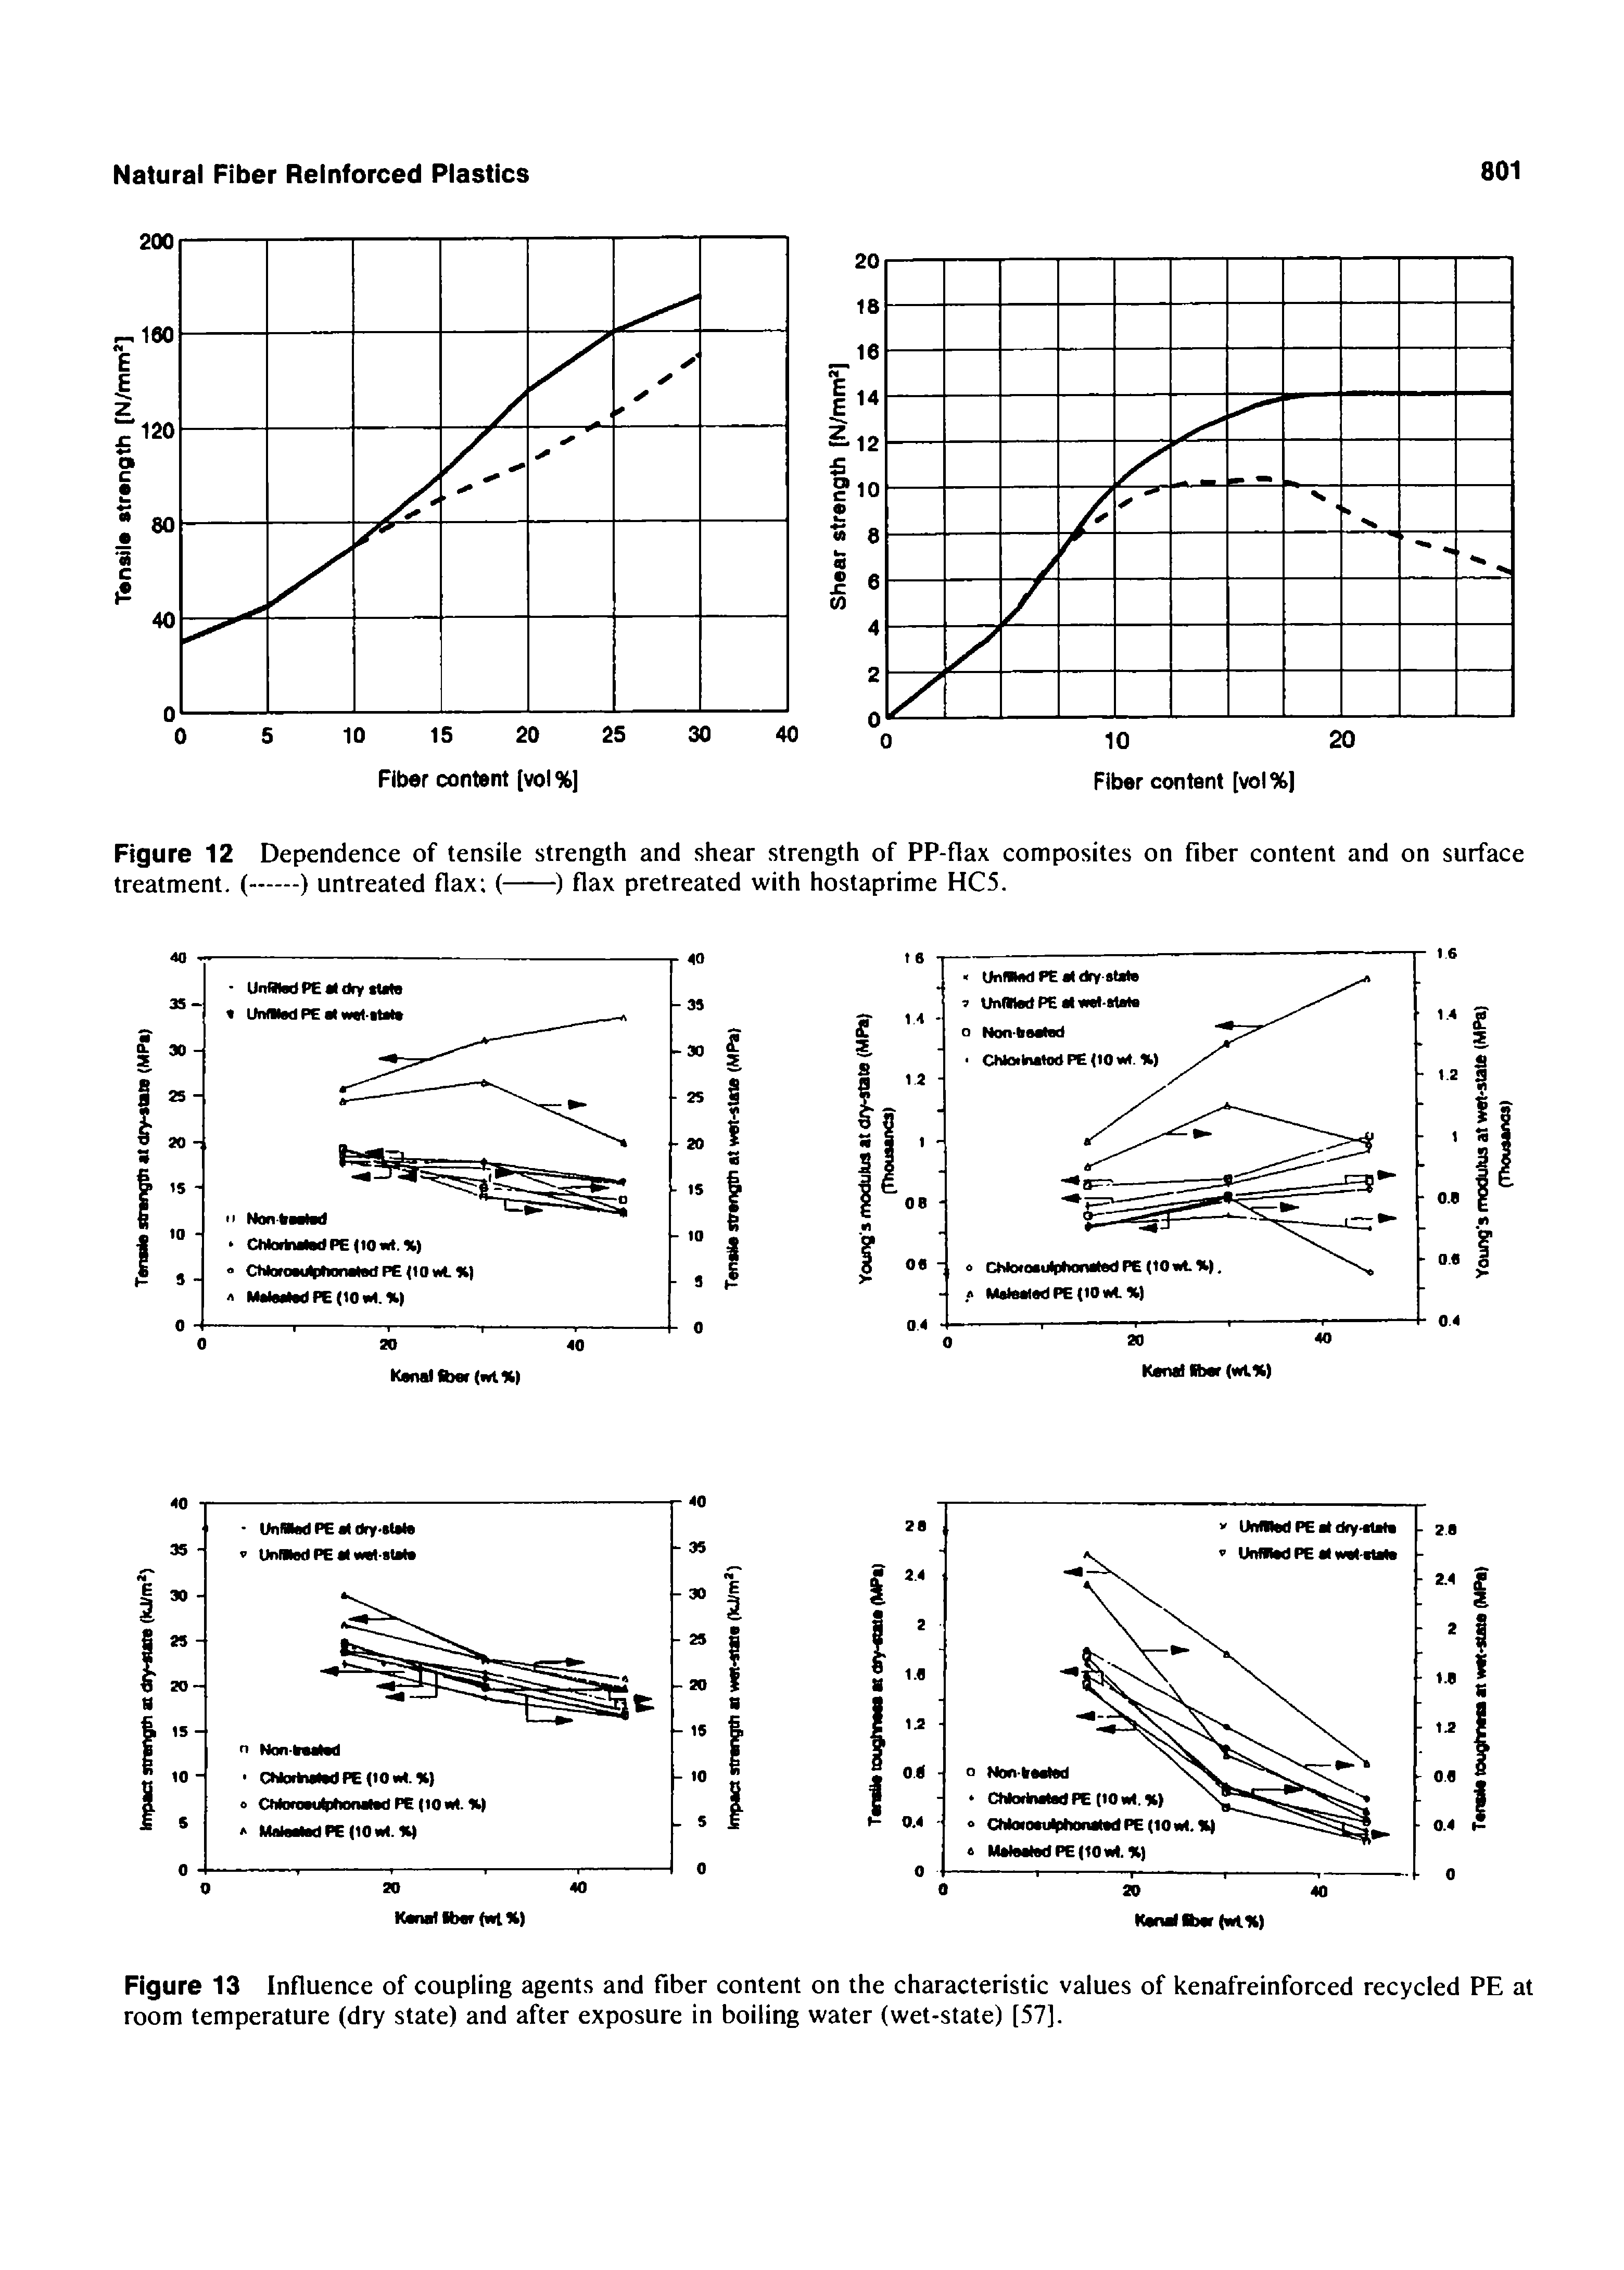 Figure 12 Dependence of tensile strength and shear strength of PP-flax composites on fiber content and on surface treatment. (-) untreated flax (-) flax pretreated with hostaprime HC5.